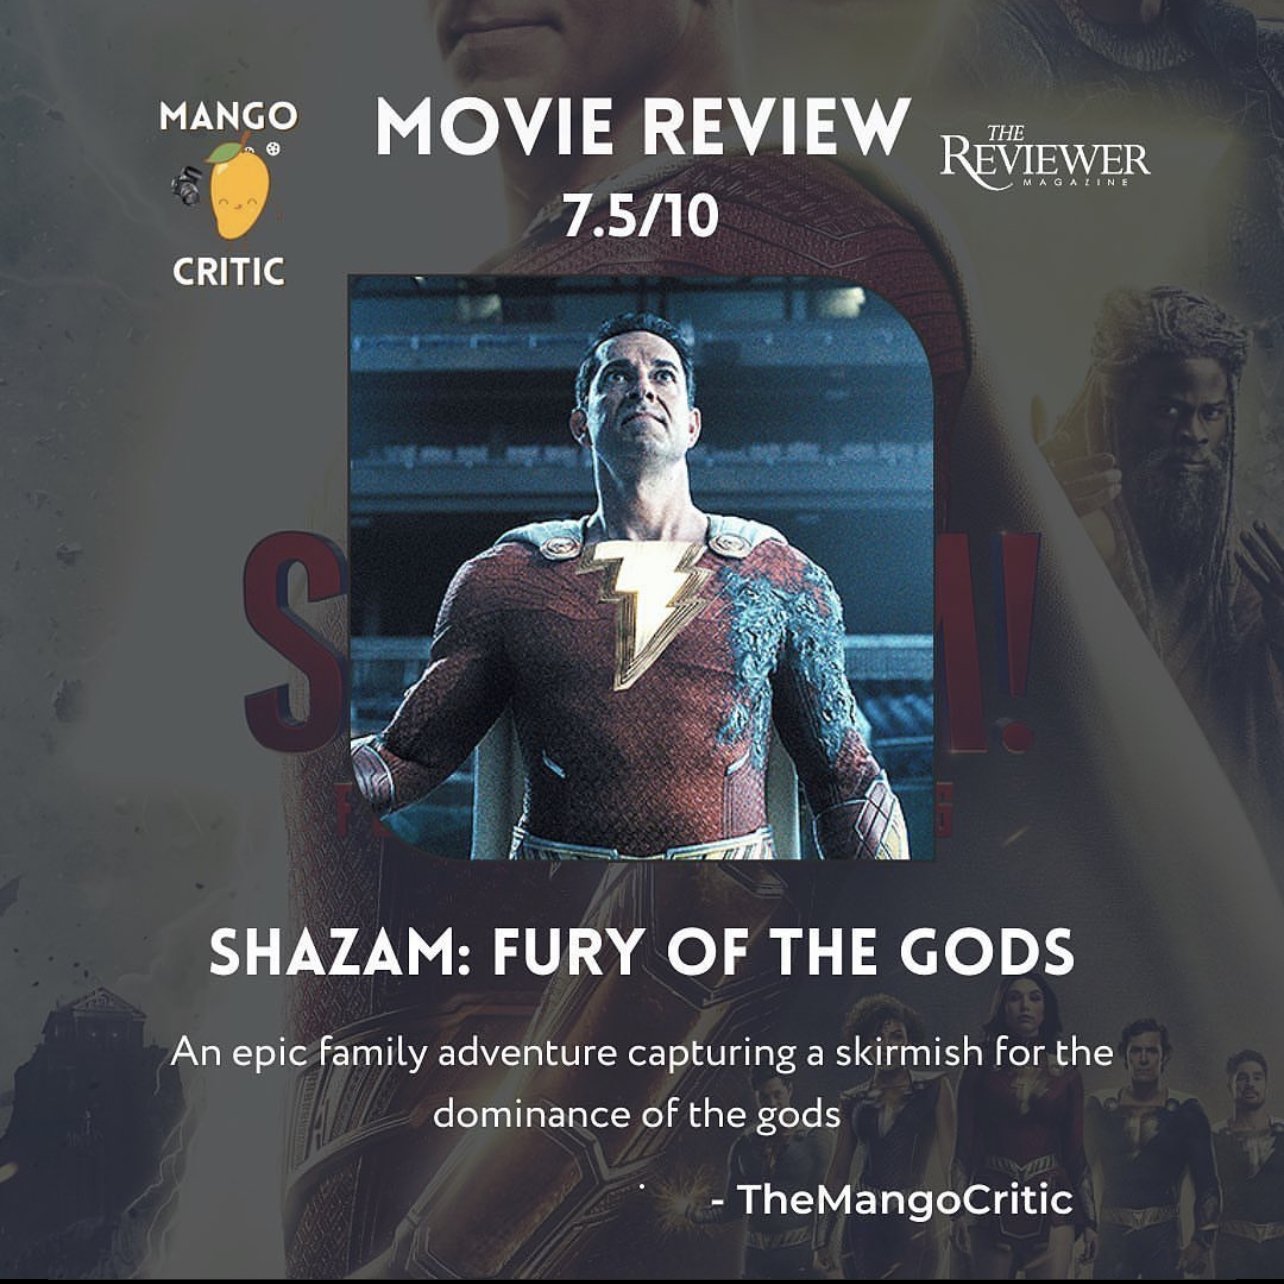 Shazam!' sequel: Is 'Fury of the Gods' good? Read the reviews - Deseret News